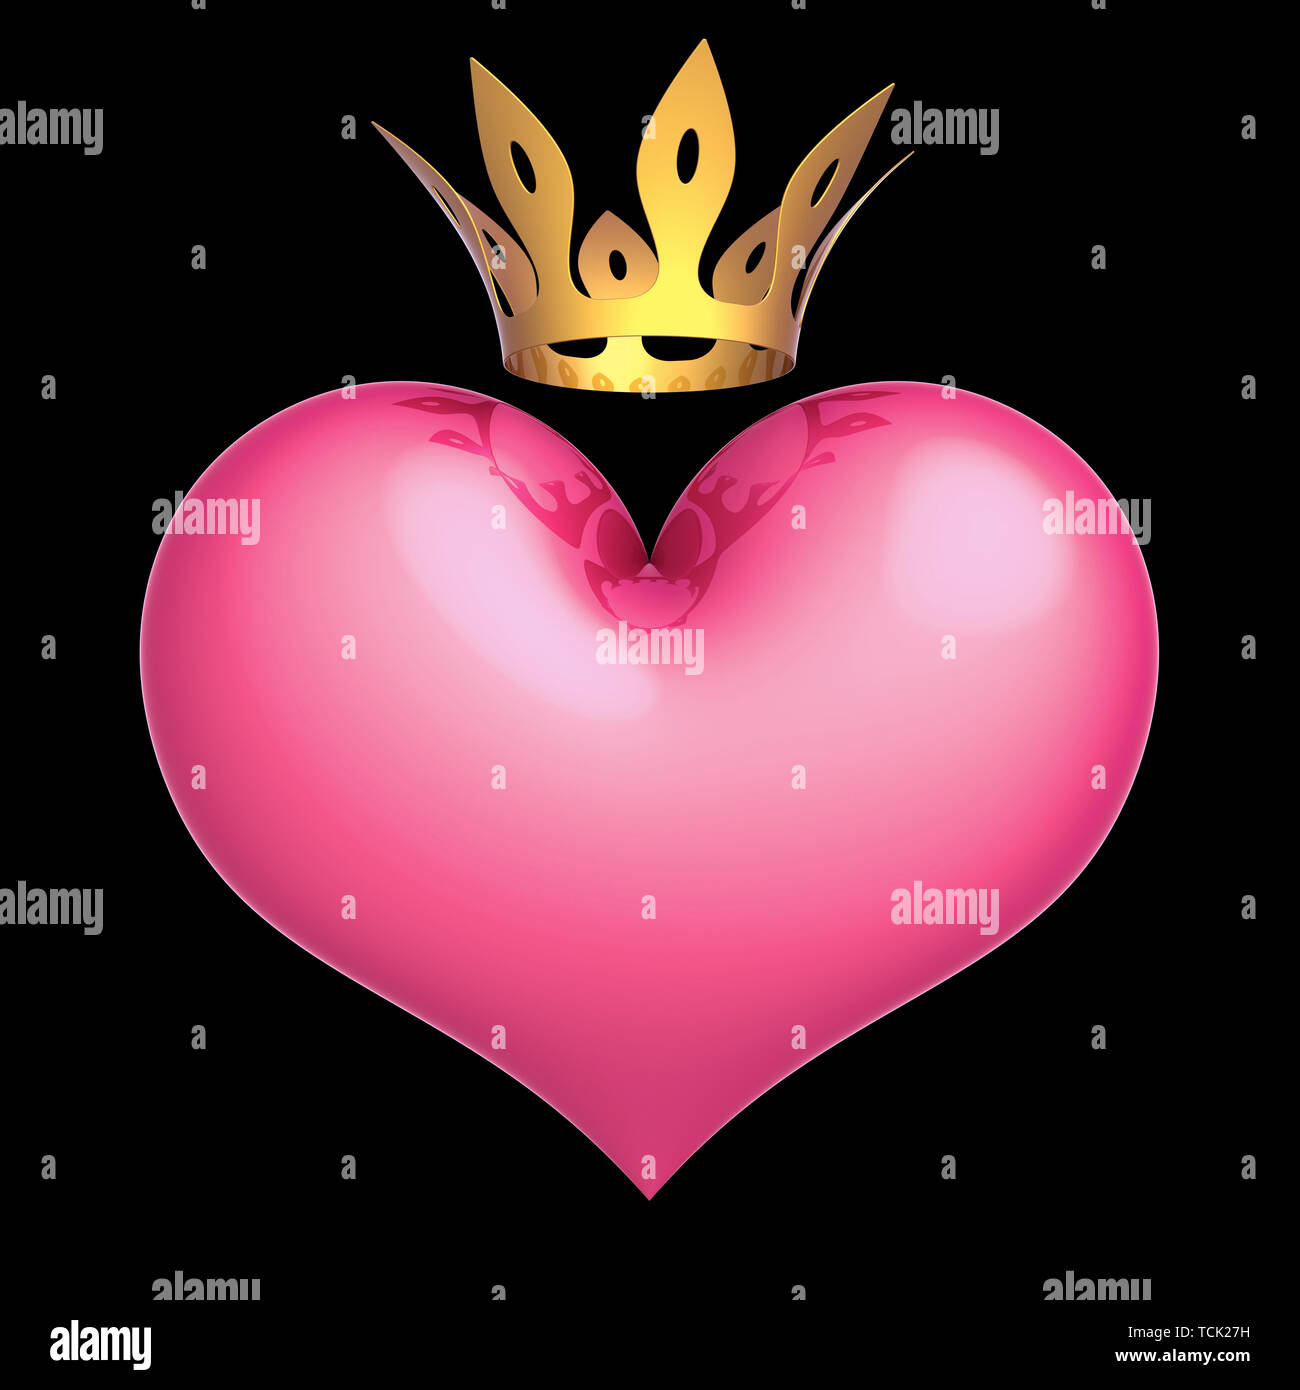 Heart king queen princess pink golden crown abstract. Royal lucky love concept. 3d illustration isolated on black background Stock Photo